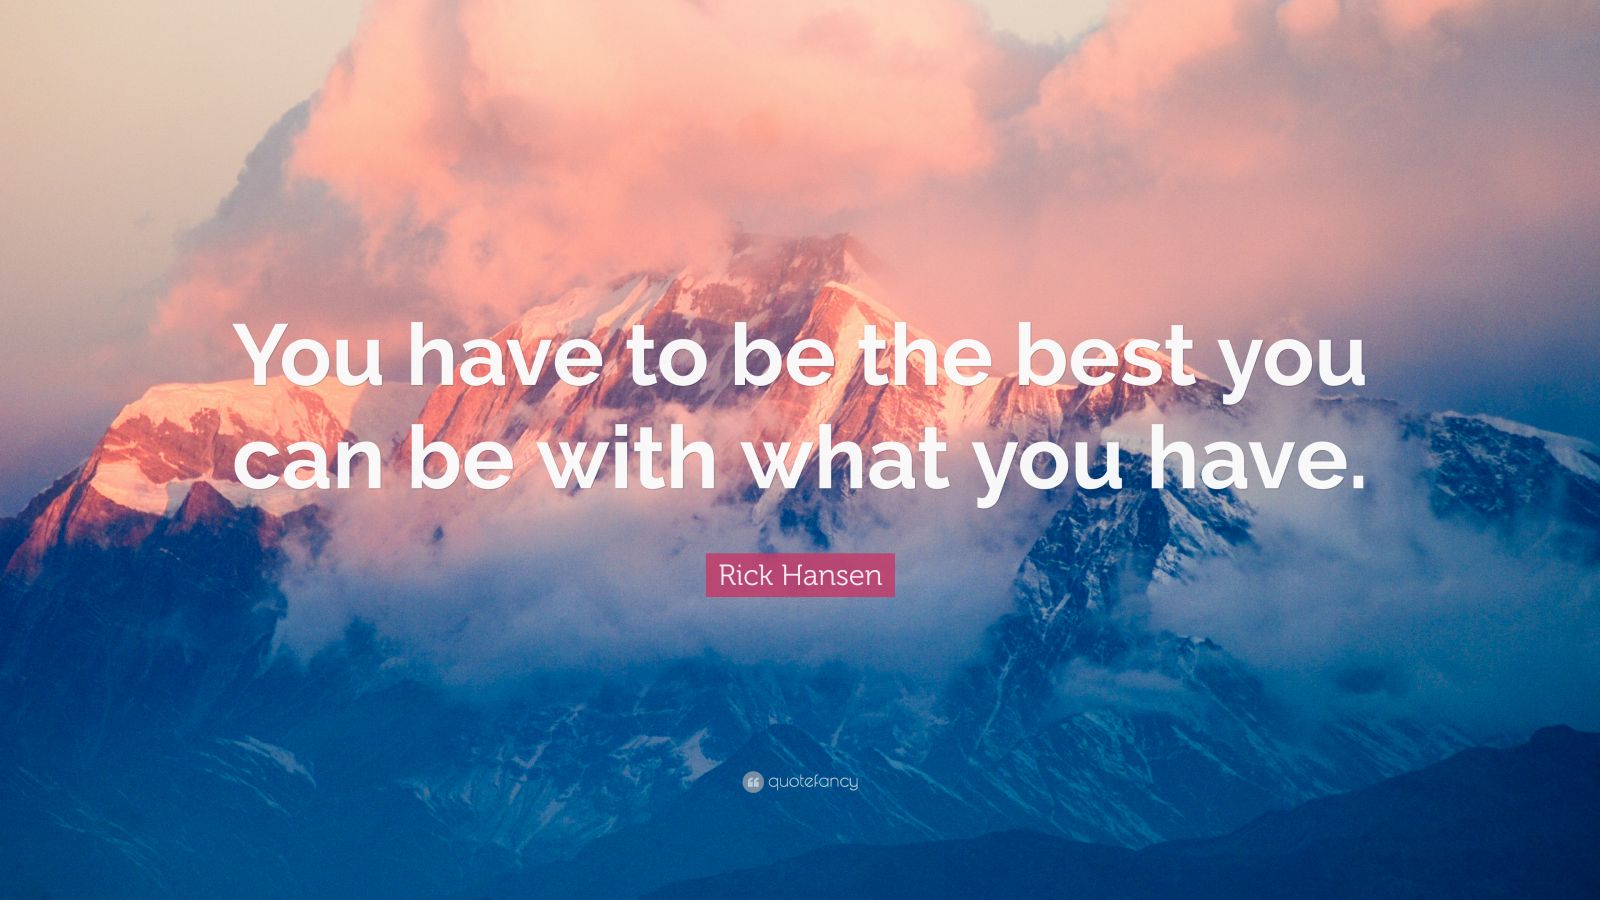 Rick Hansen Quote: “You have to be the best you can be with what you ...